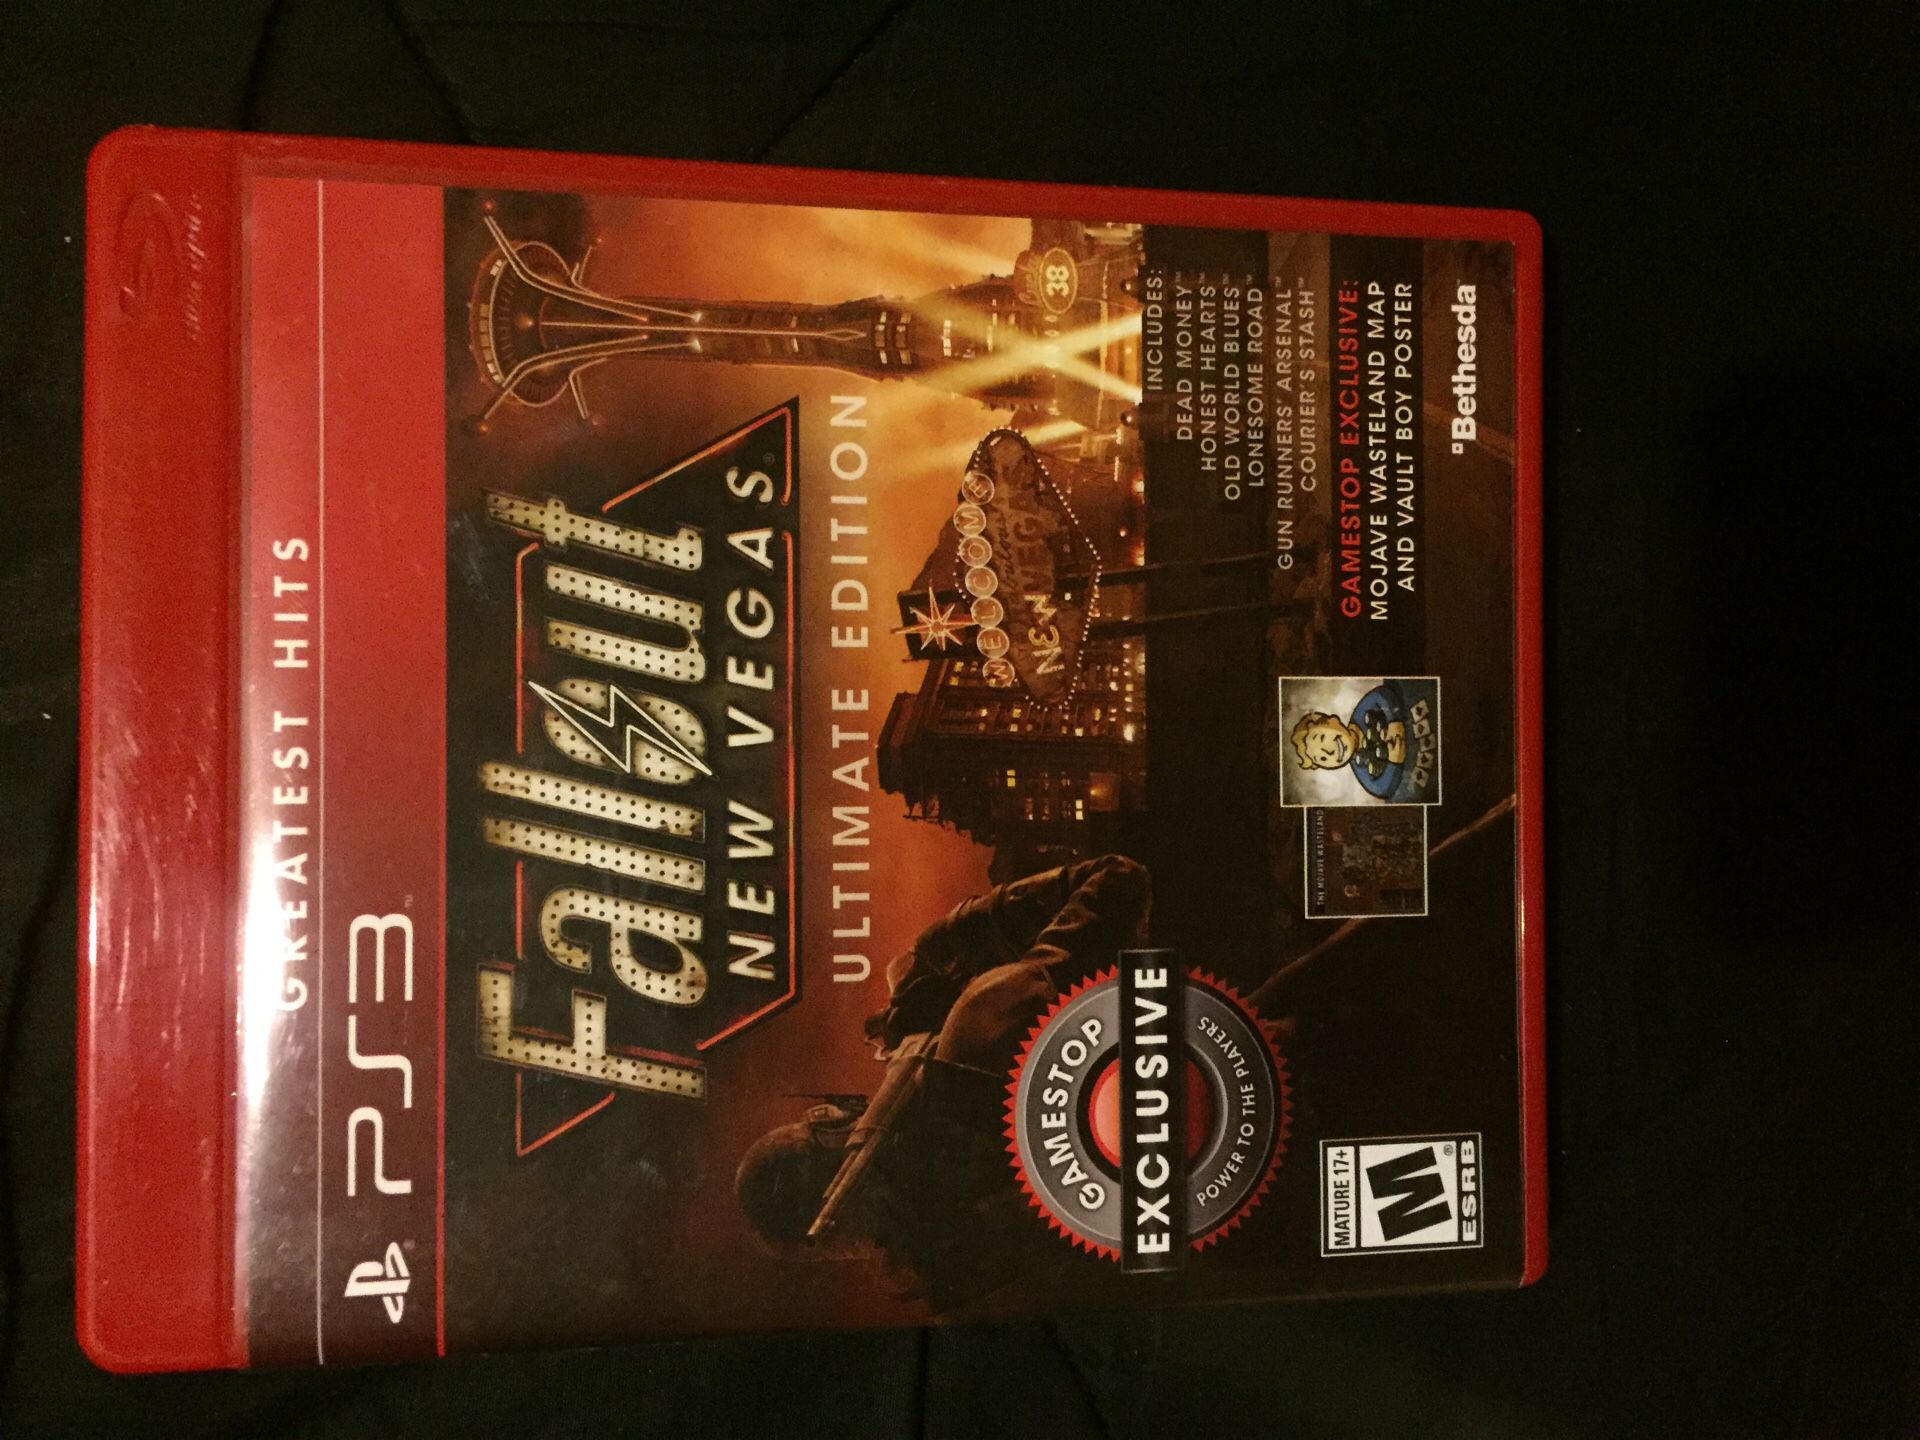 Fallout New Vegas Ultimate Edition [ Greatest Hits ] (PS3) NEW